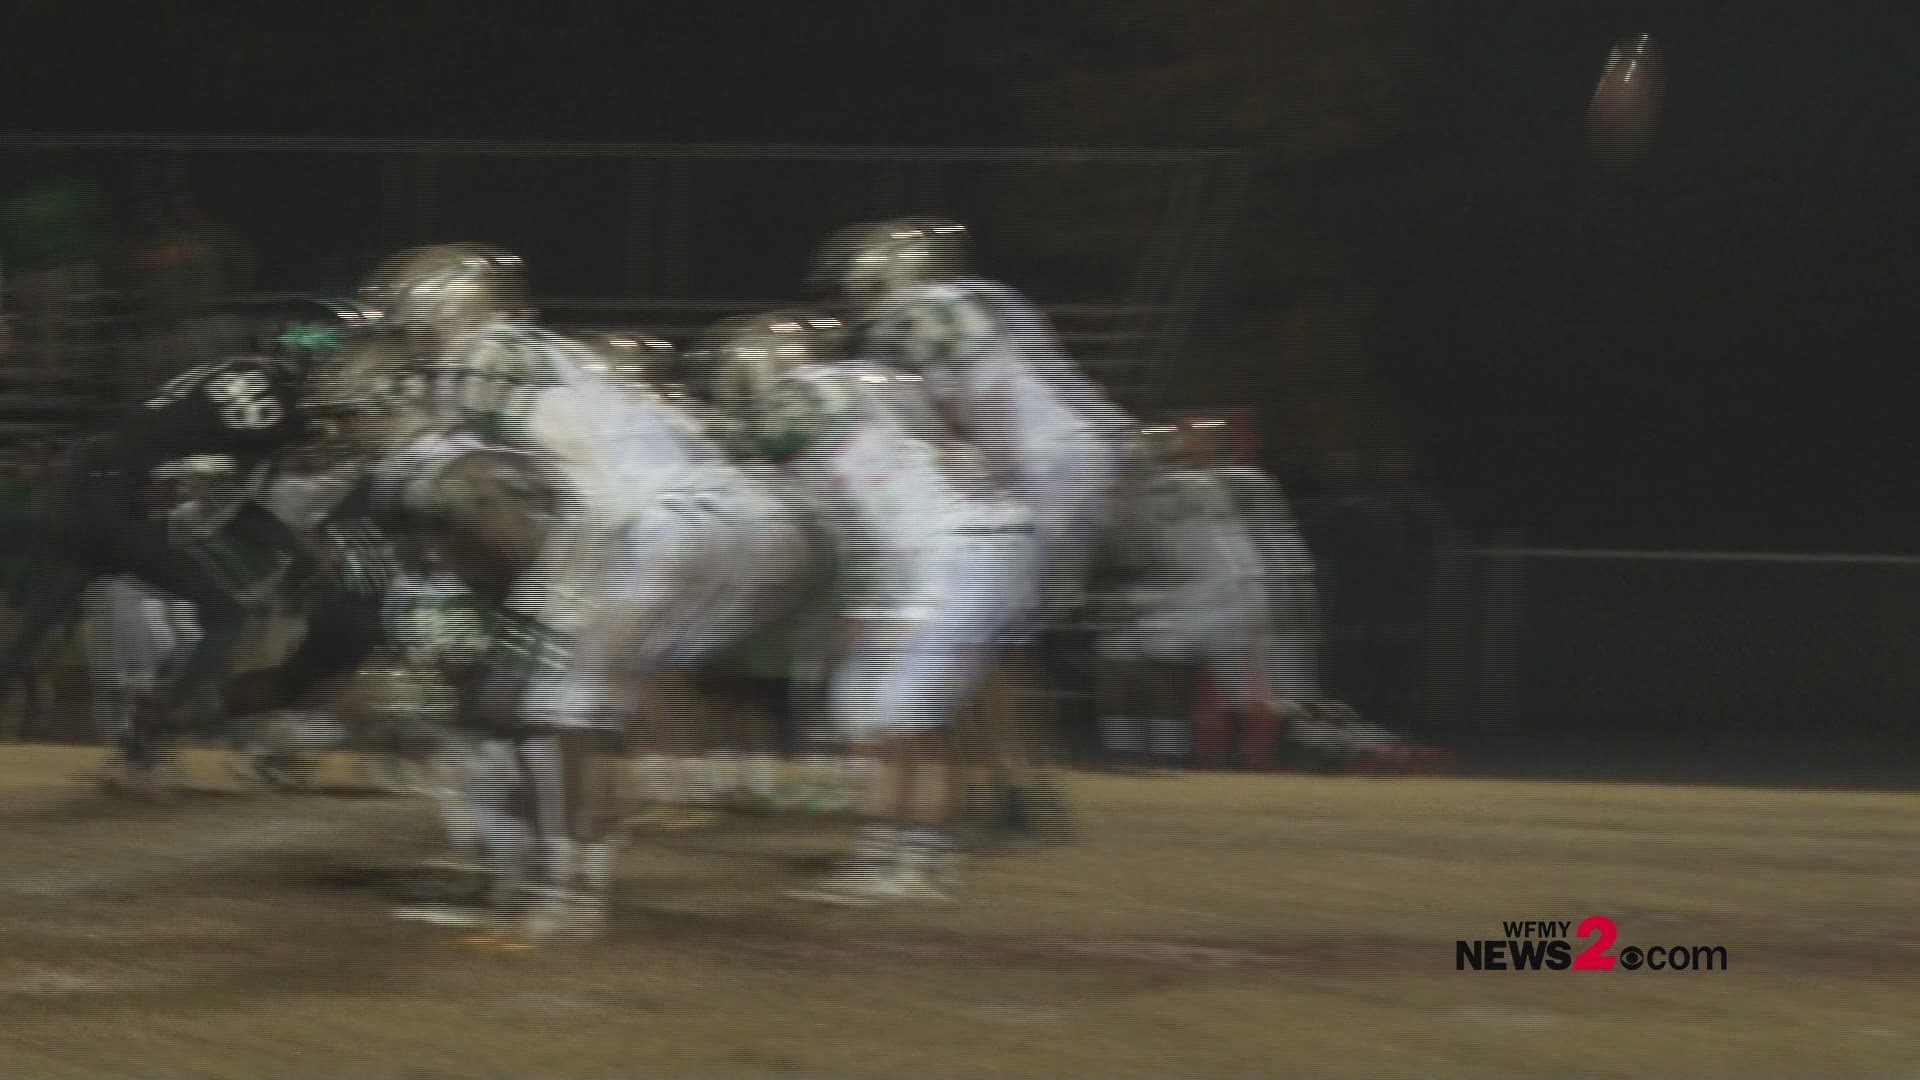 Southwest Guilford wrapped up their regular season Friday night with a 30-0 win at home against Smith.